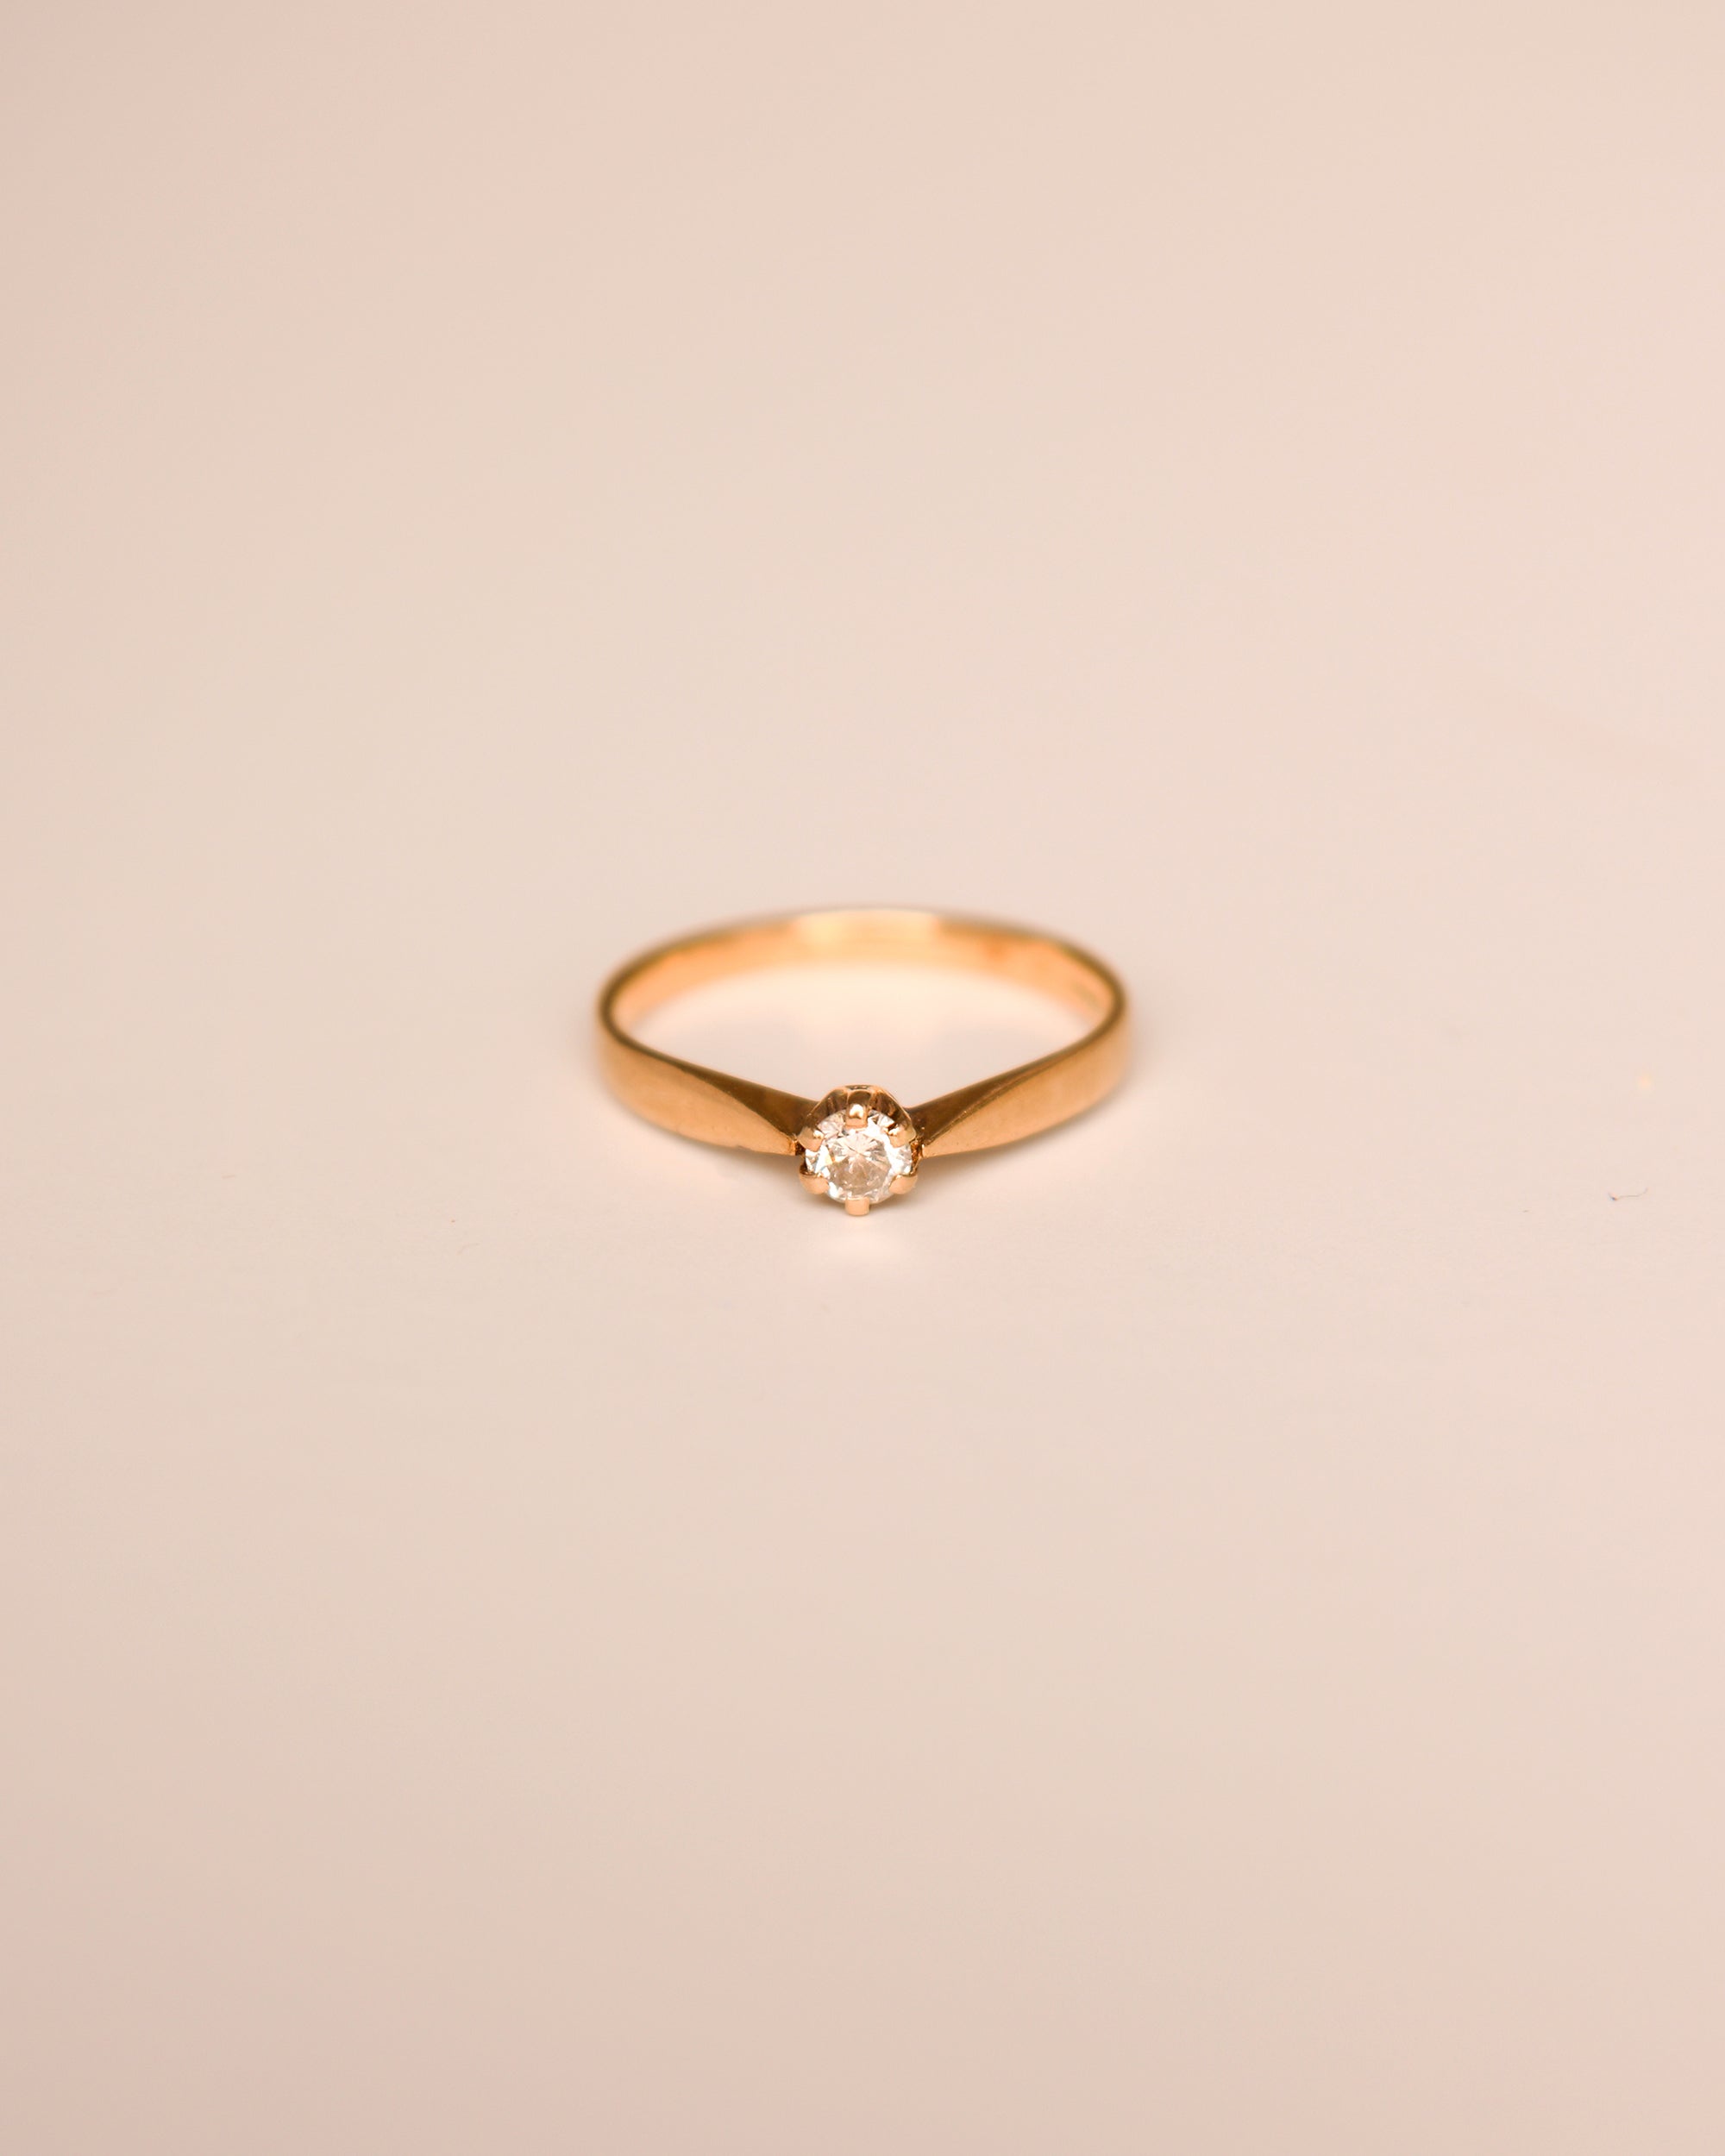 Alice 9ct Gold Vintage Solitaire Diamond Ring